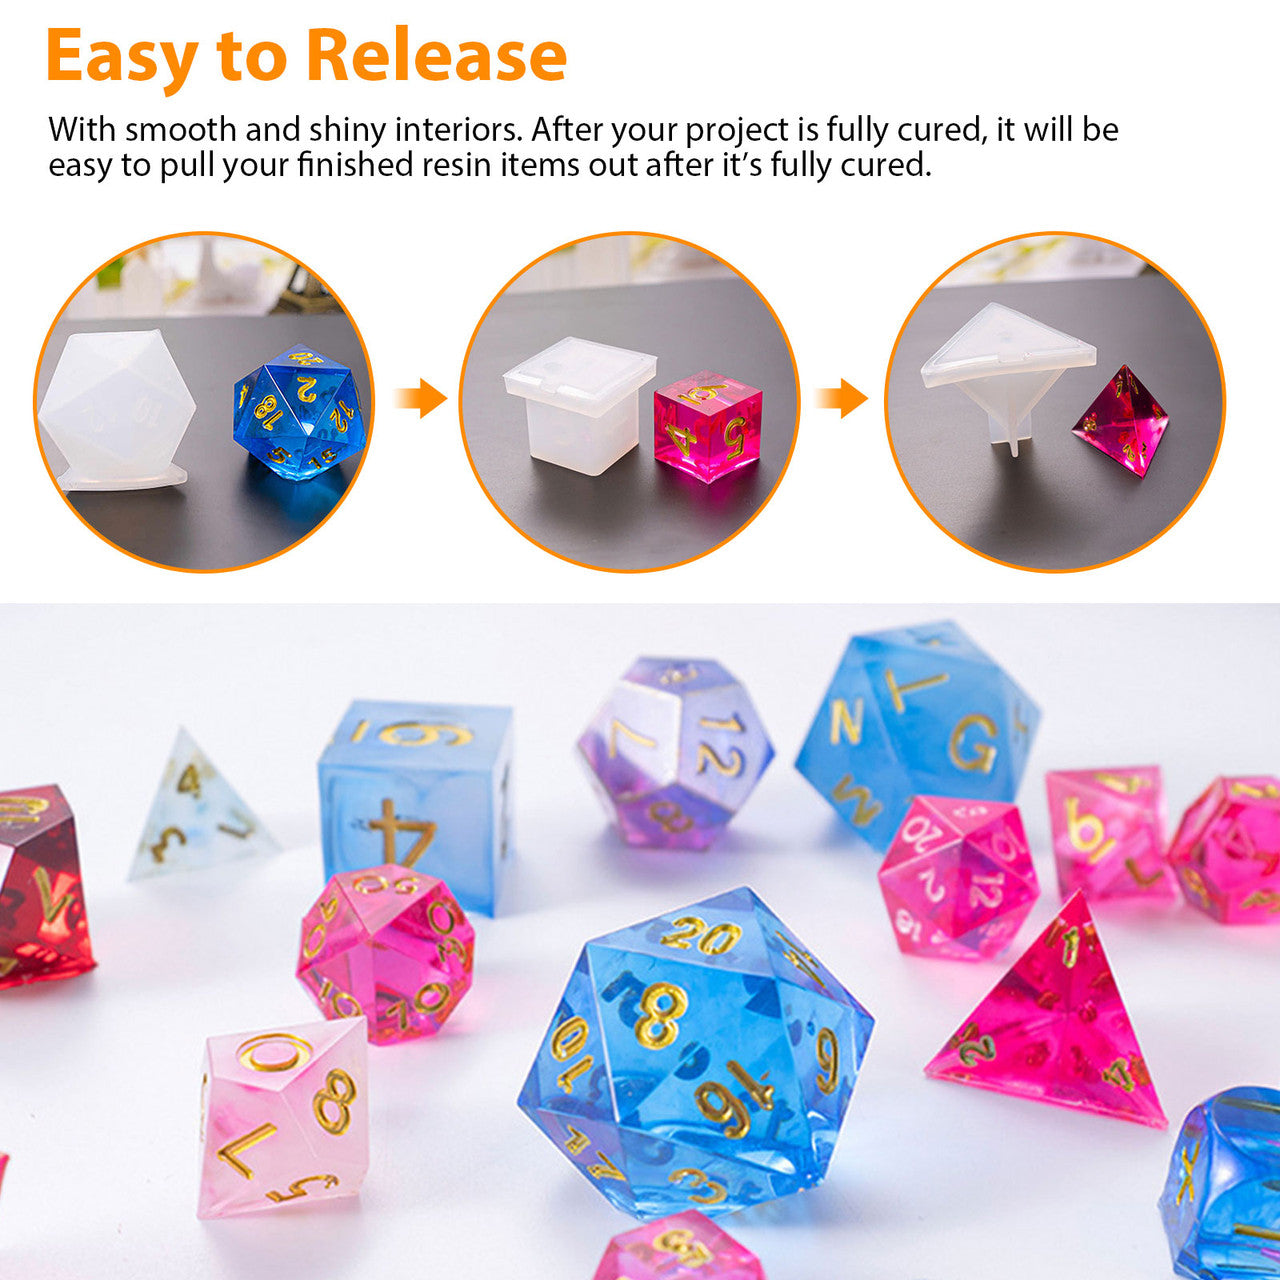 Square Triangle Dice Multi-spec Digital Game Silicone Mould Epoxy Resin Silicone Molds, Polyhedral Dice Resin Casting Molds Making, 7Pcs